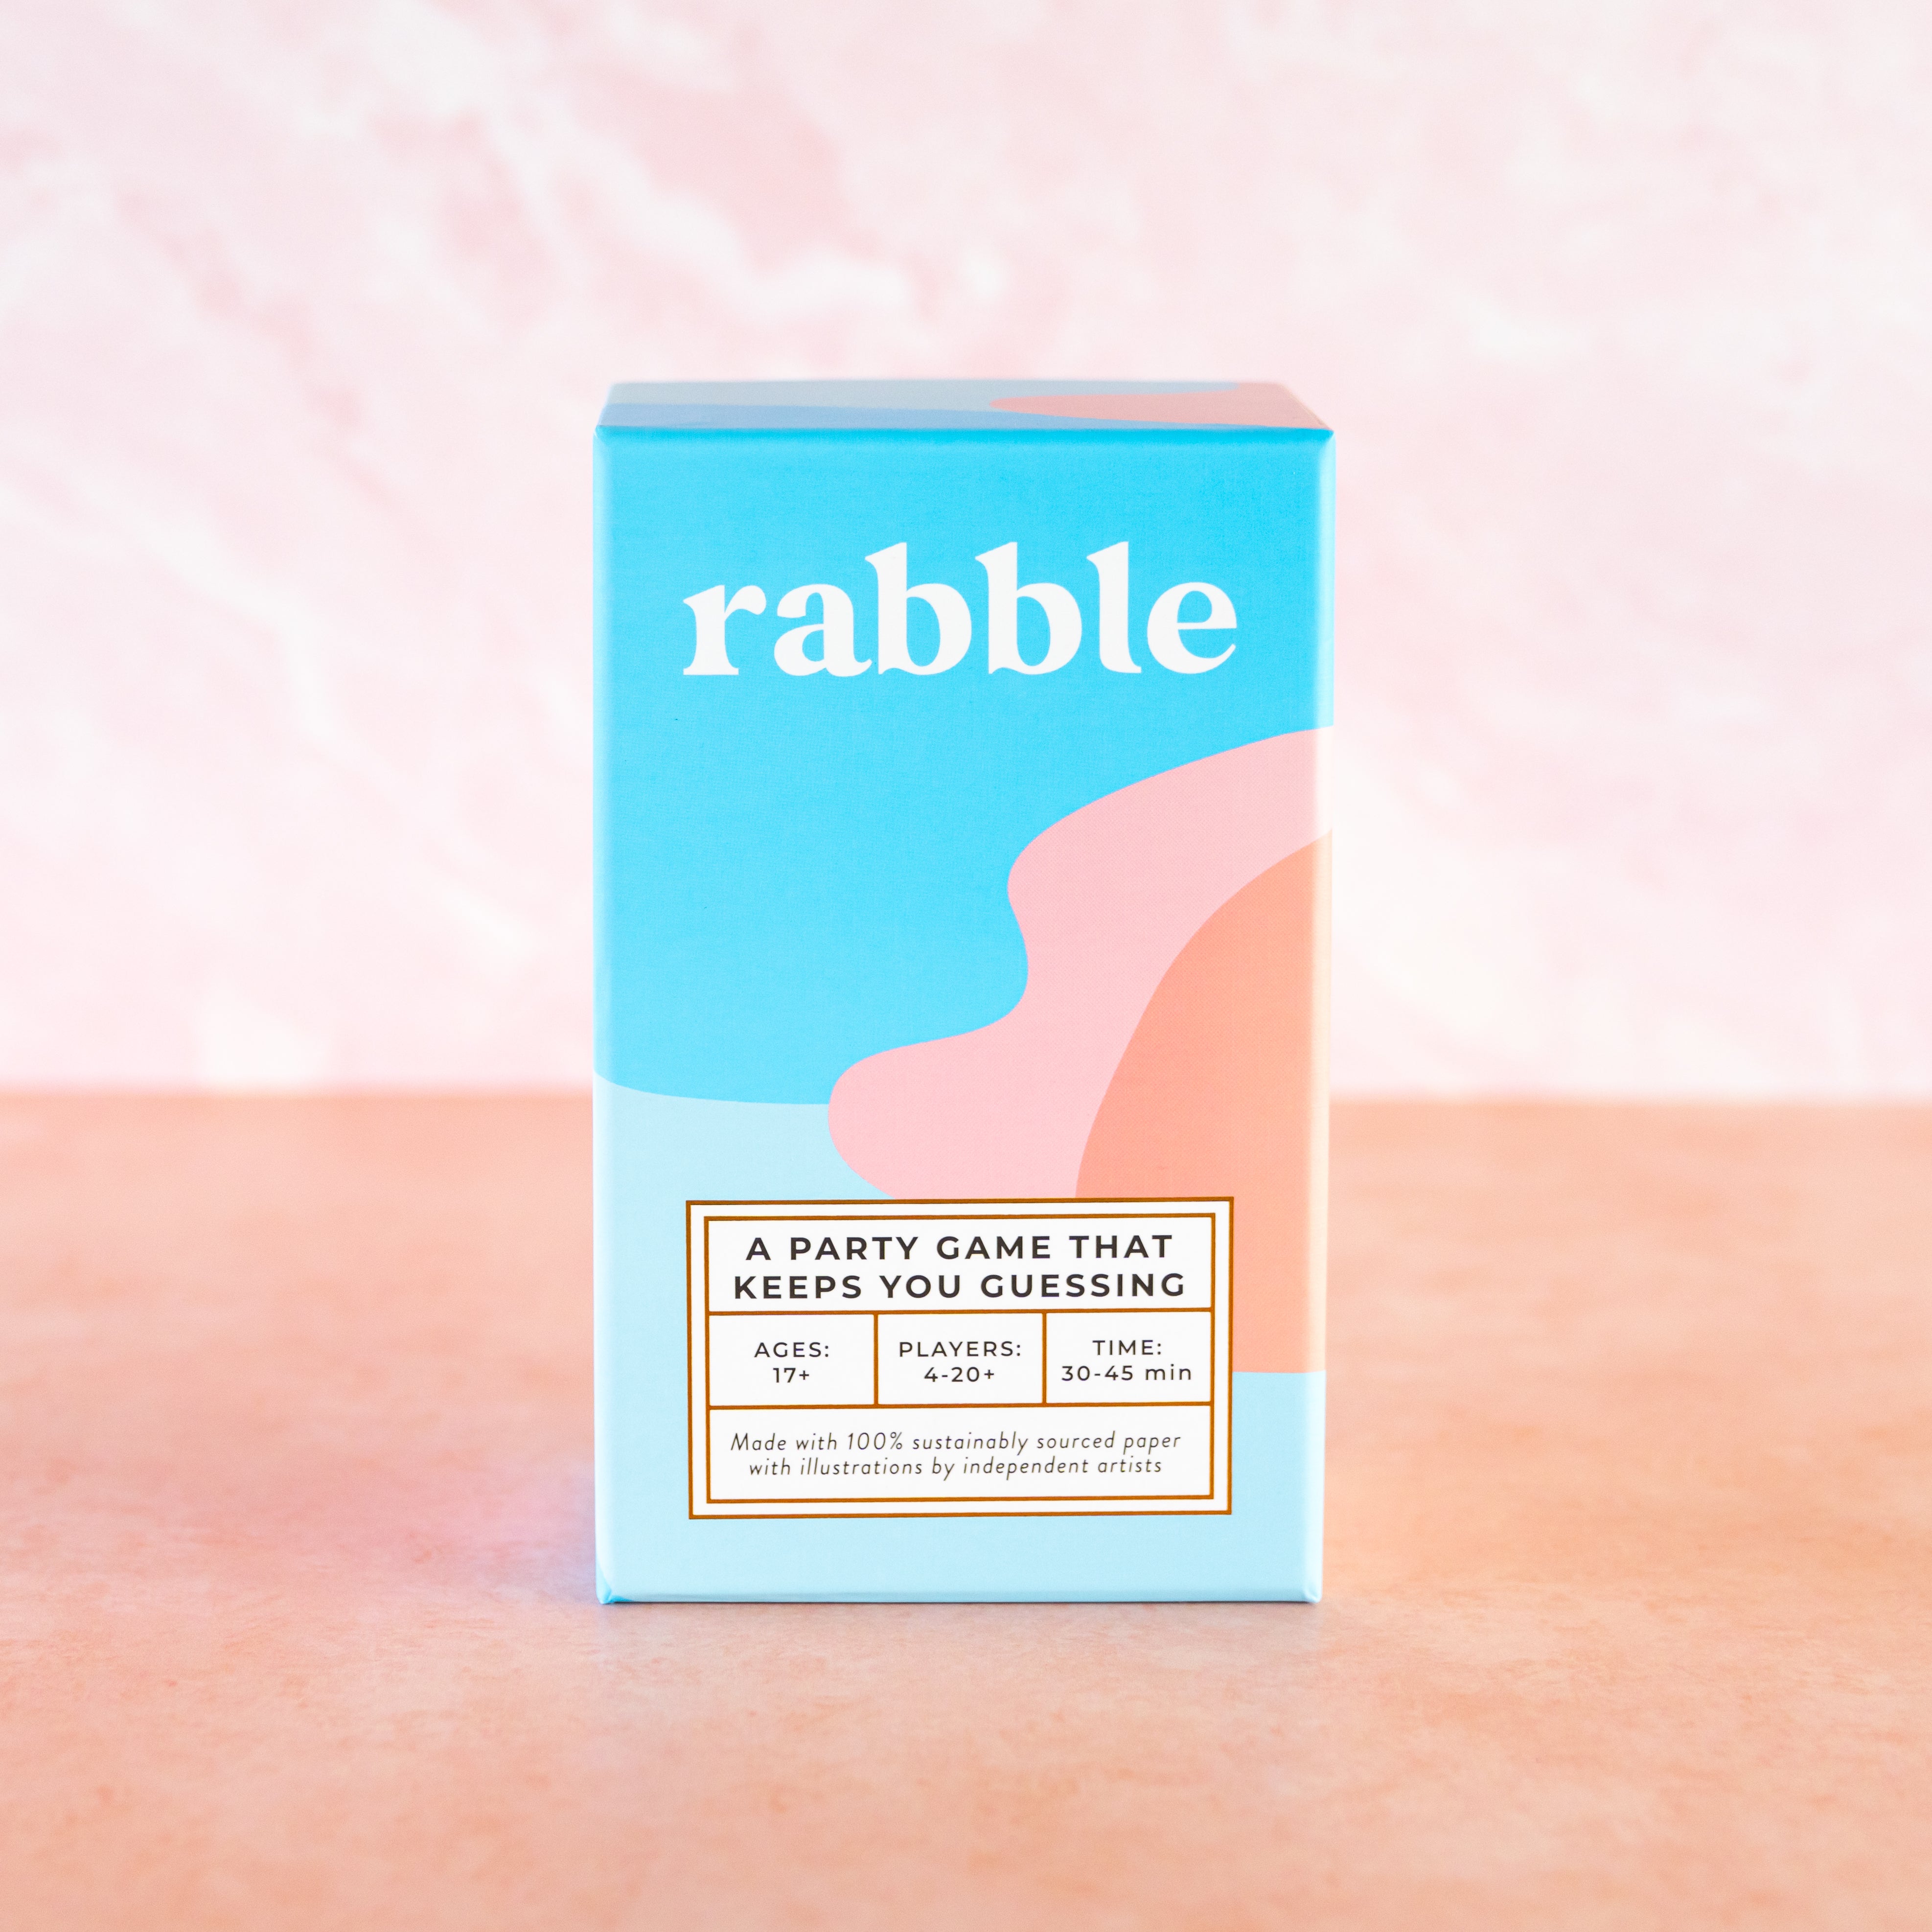 Rabble - A party game that keeps you guessing